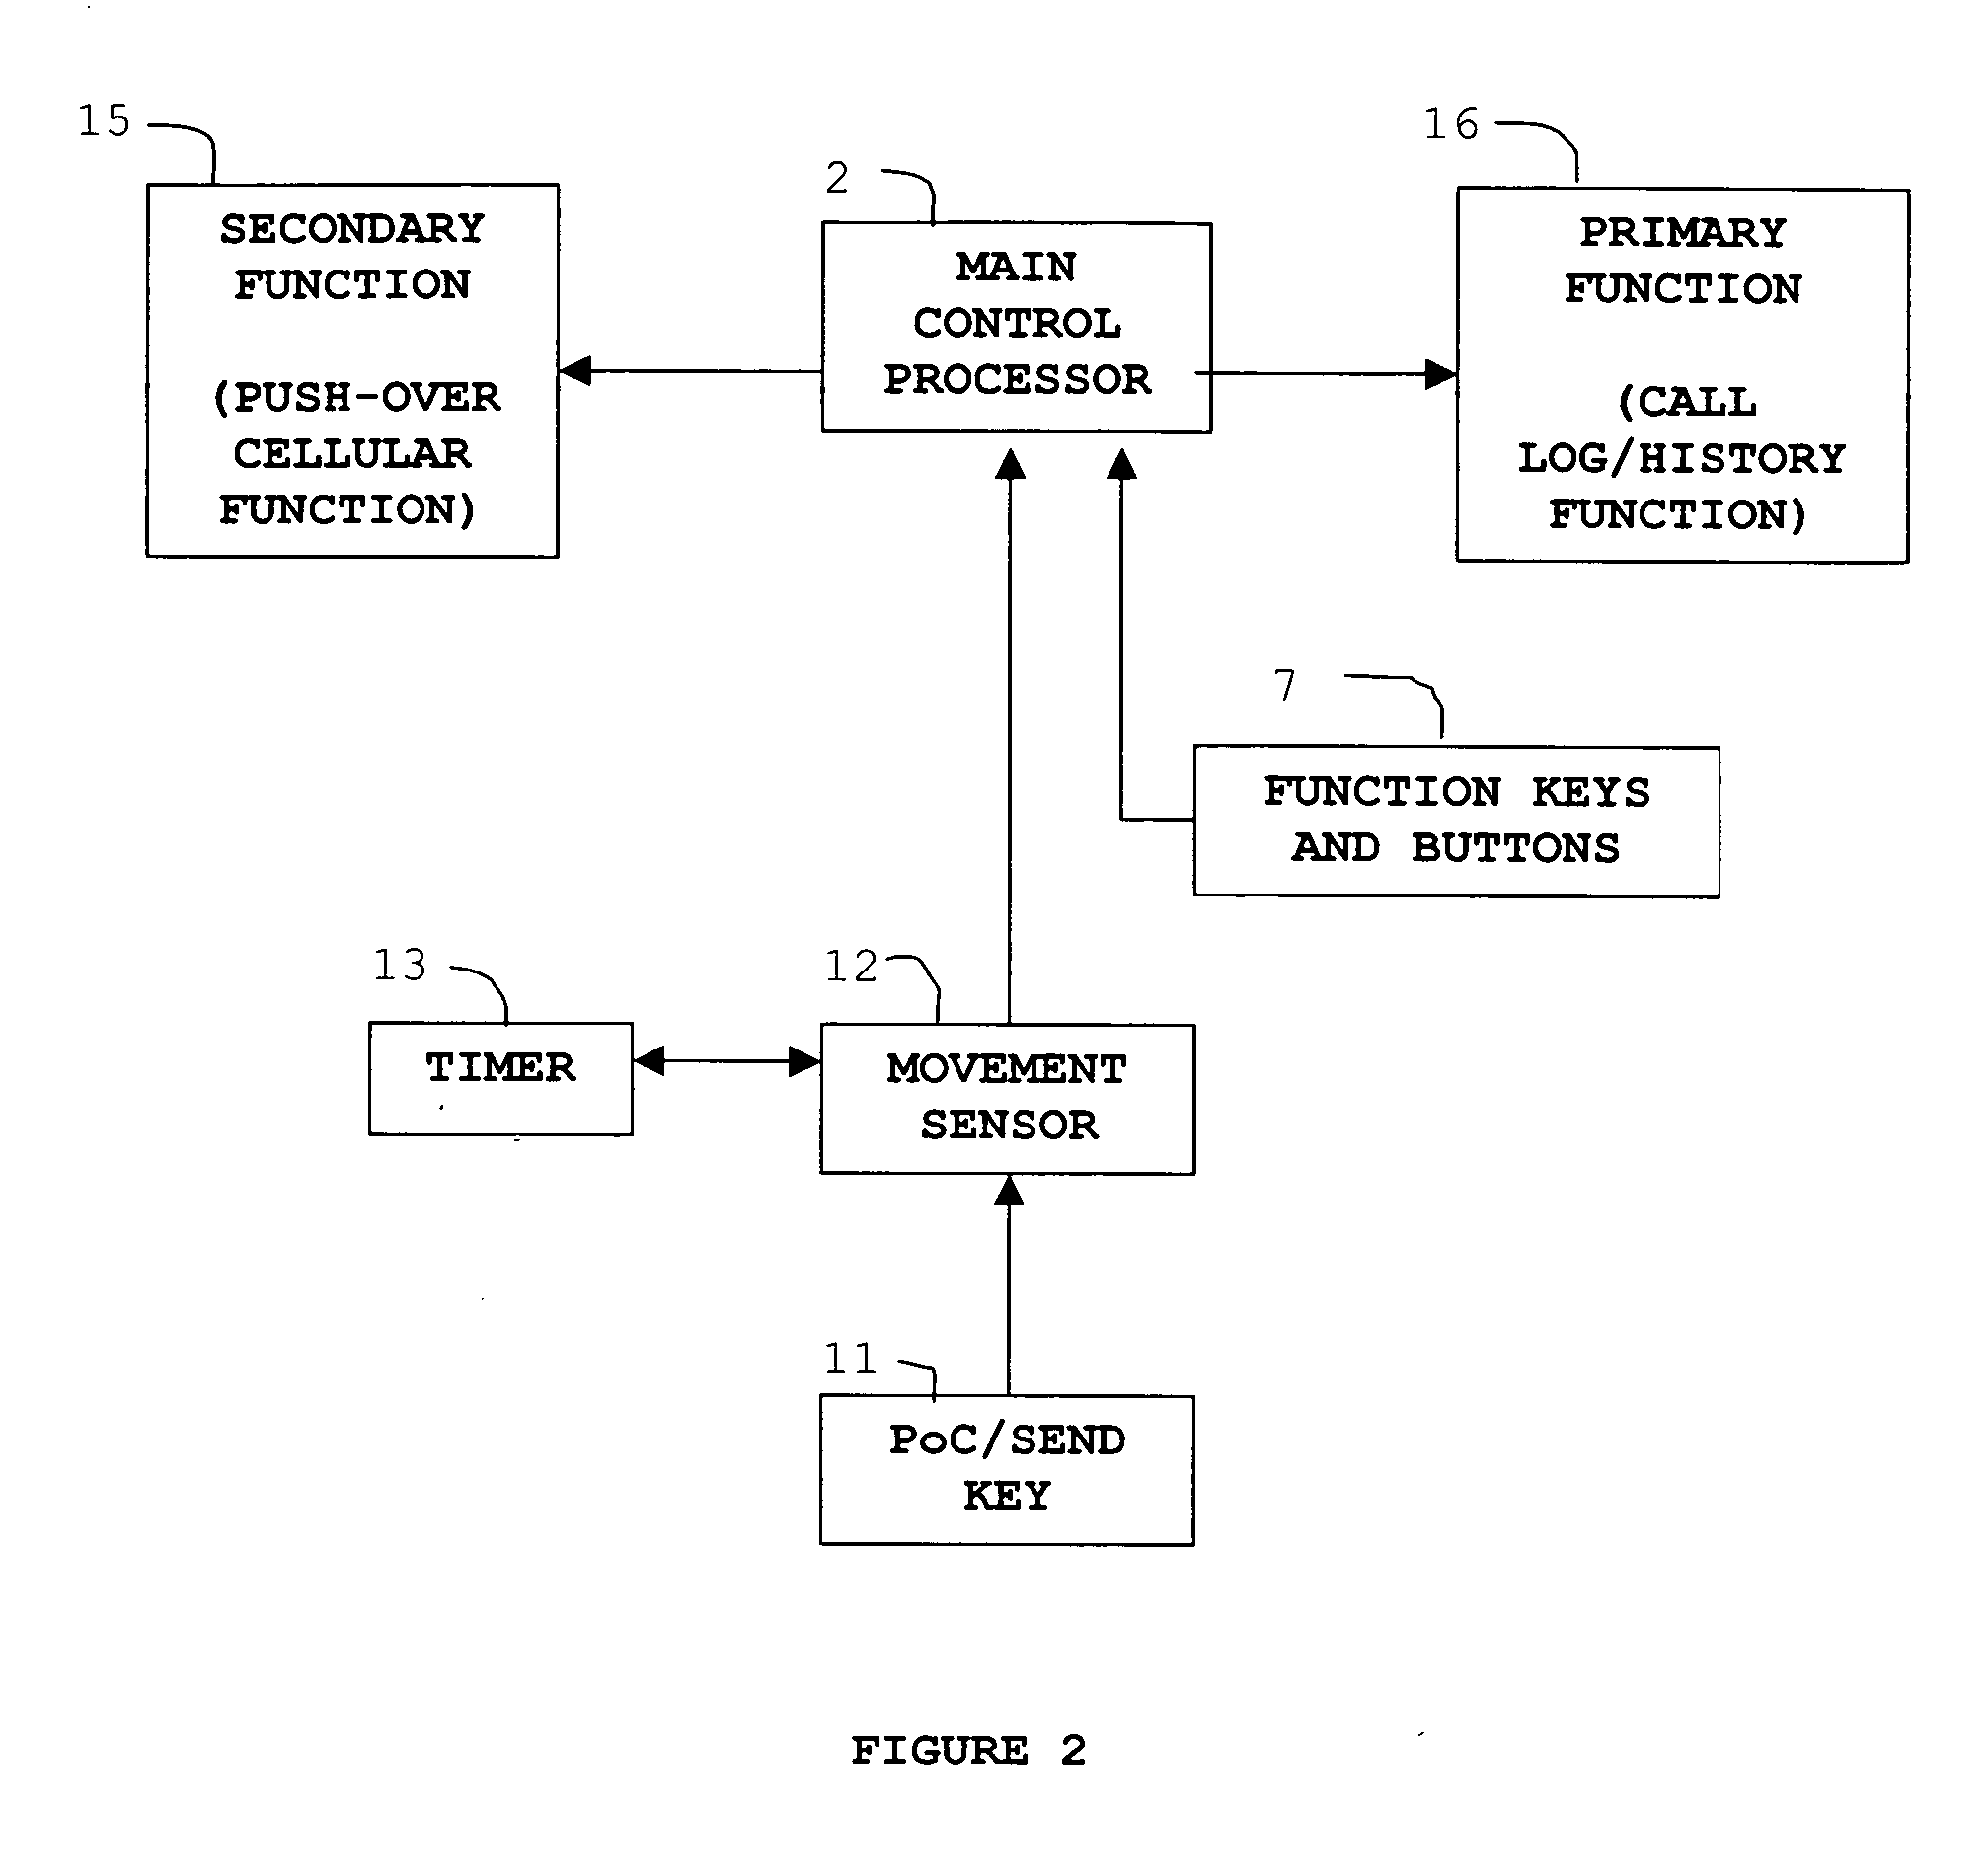 Multi-function key for electronic devices